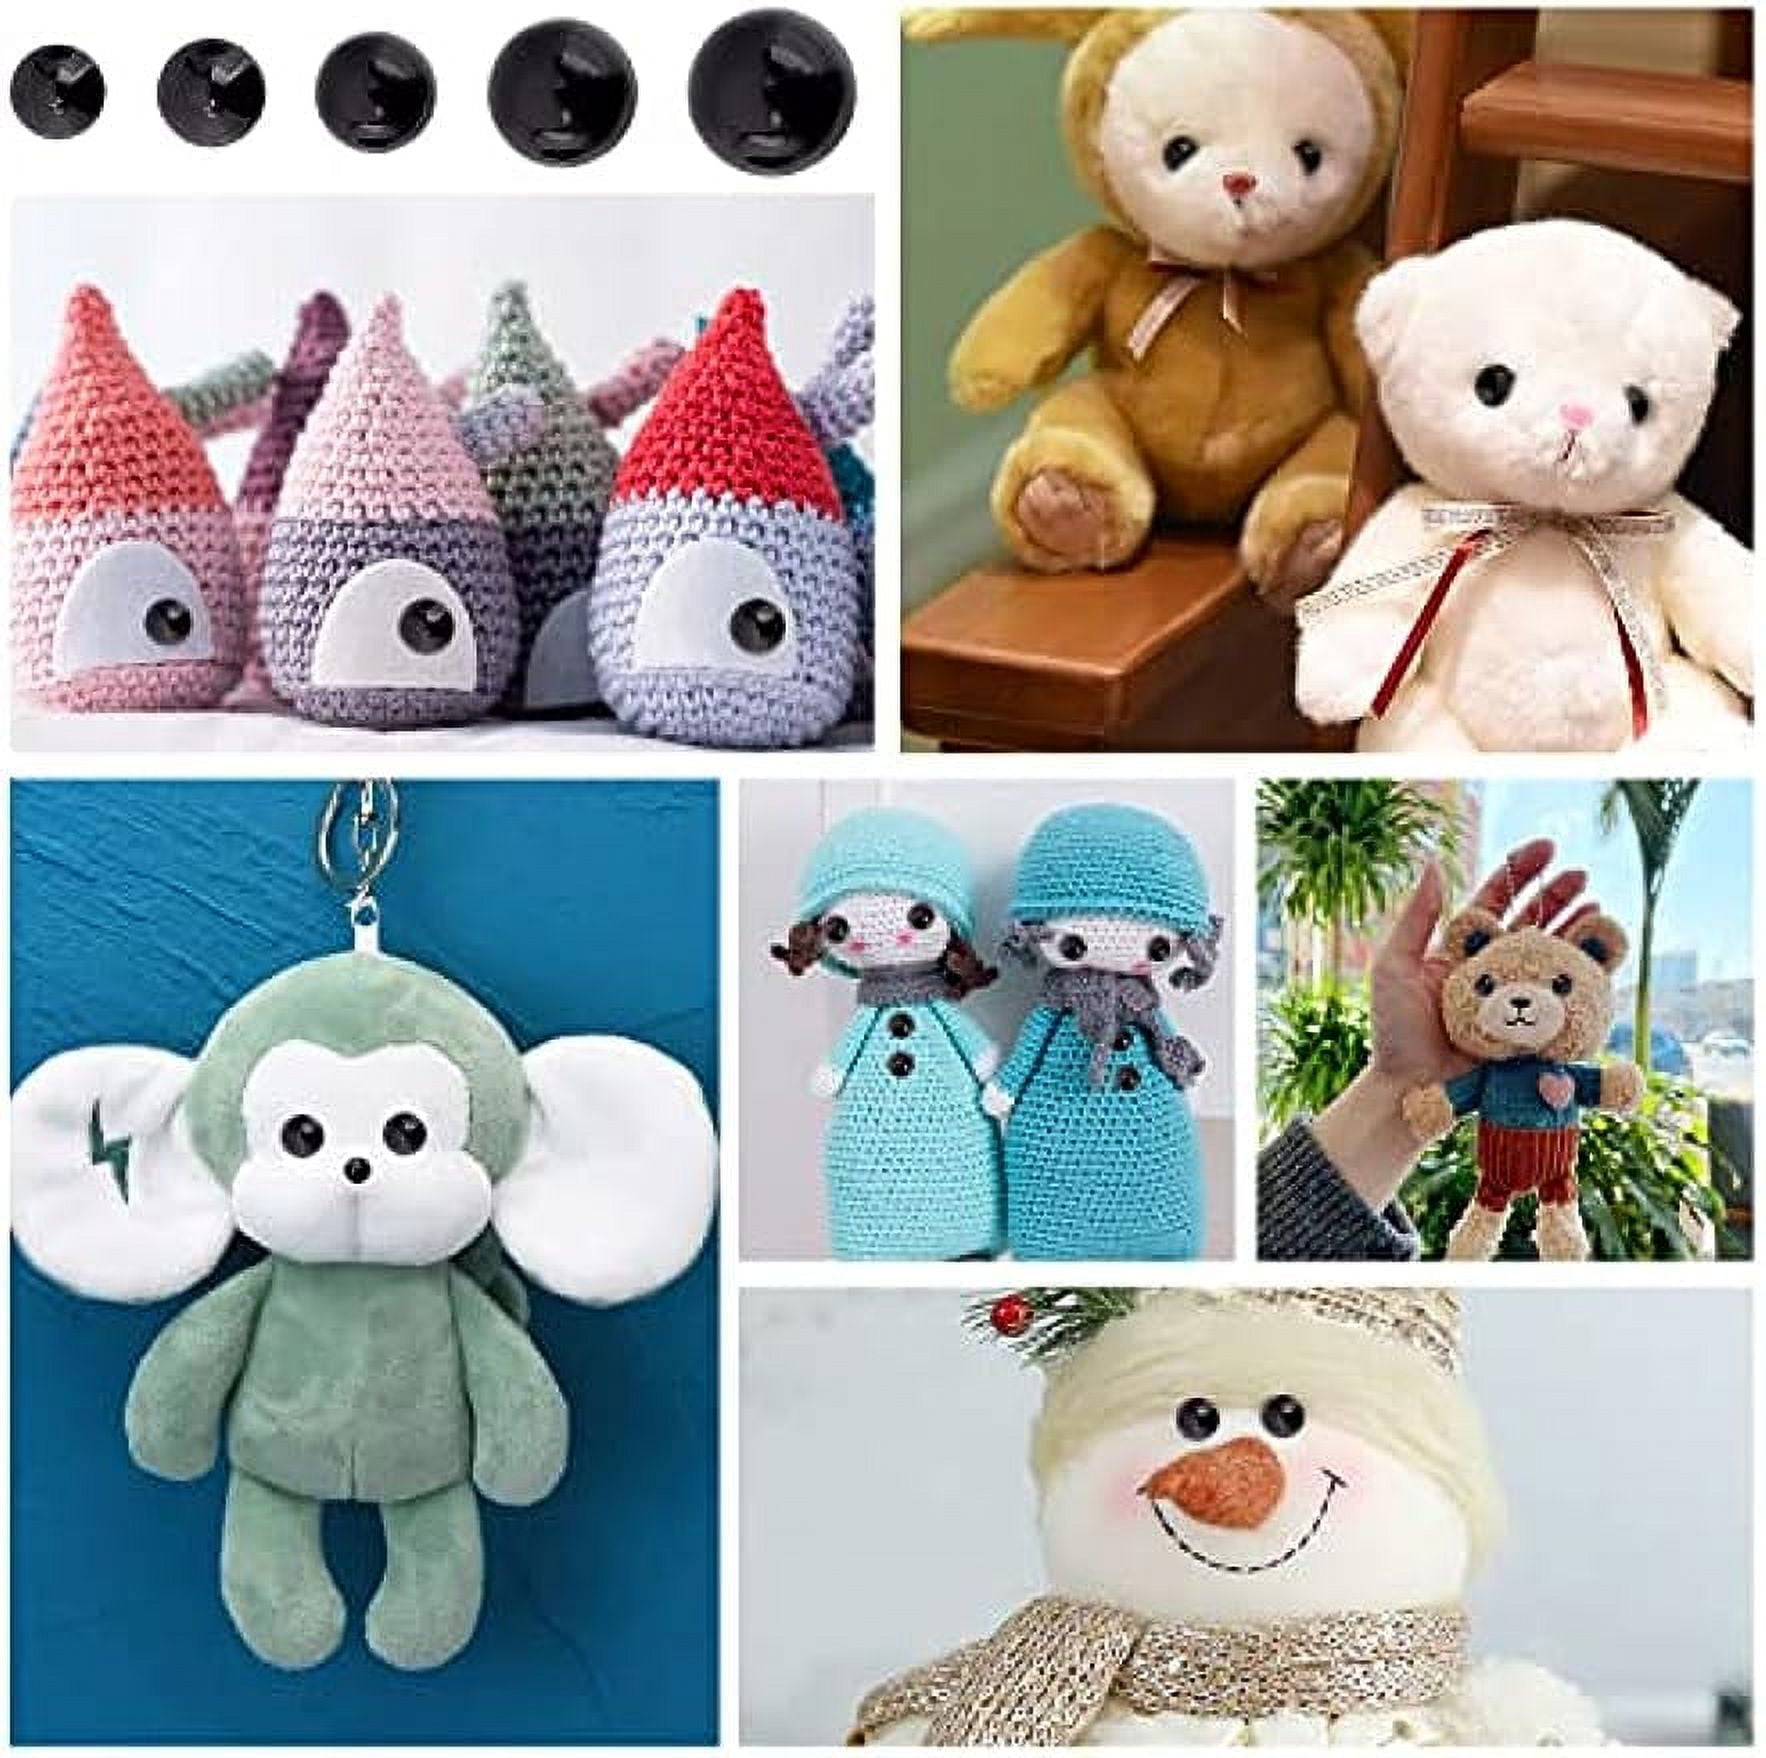 56 Pieces 16-30 Mm Large Safety Eyes For Amigurumi Big Stuffed Animal  Plastic Craft Crochet Diy Of Puppet, Bear, Toy Doll Making Supplies, 6  Sizes (gr